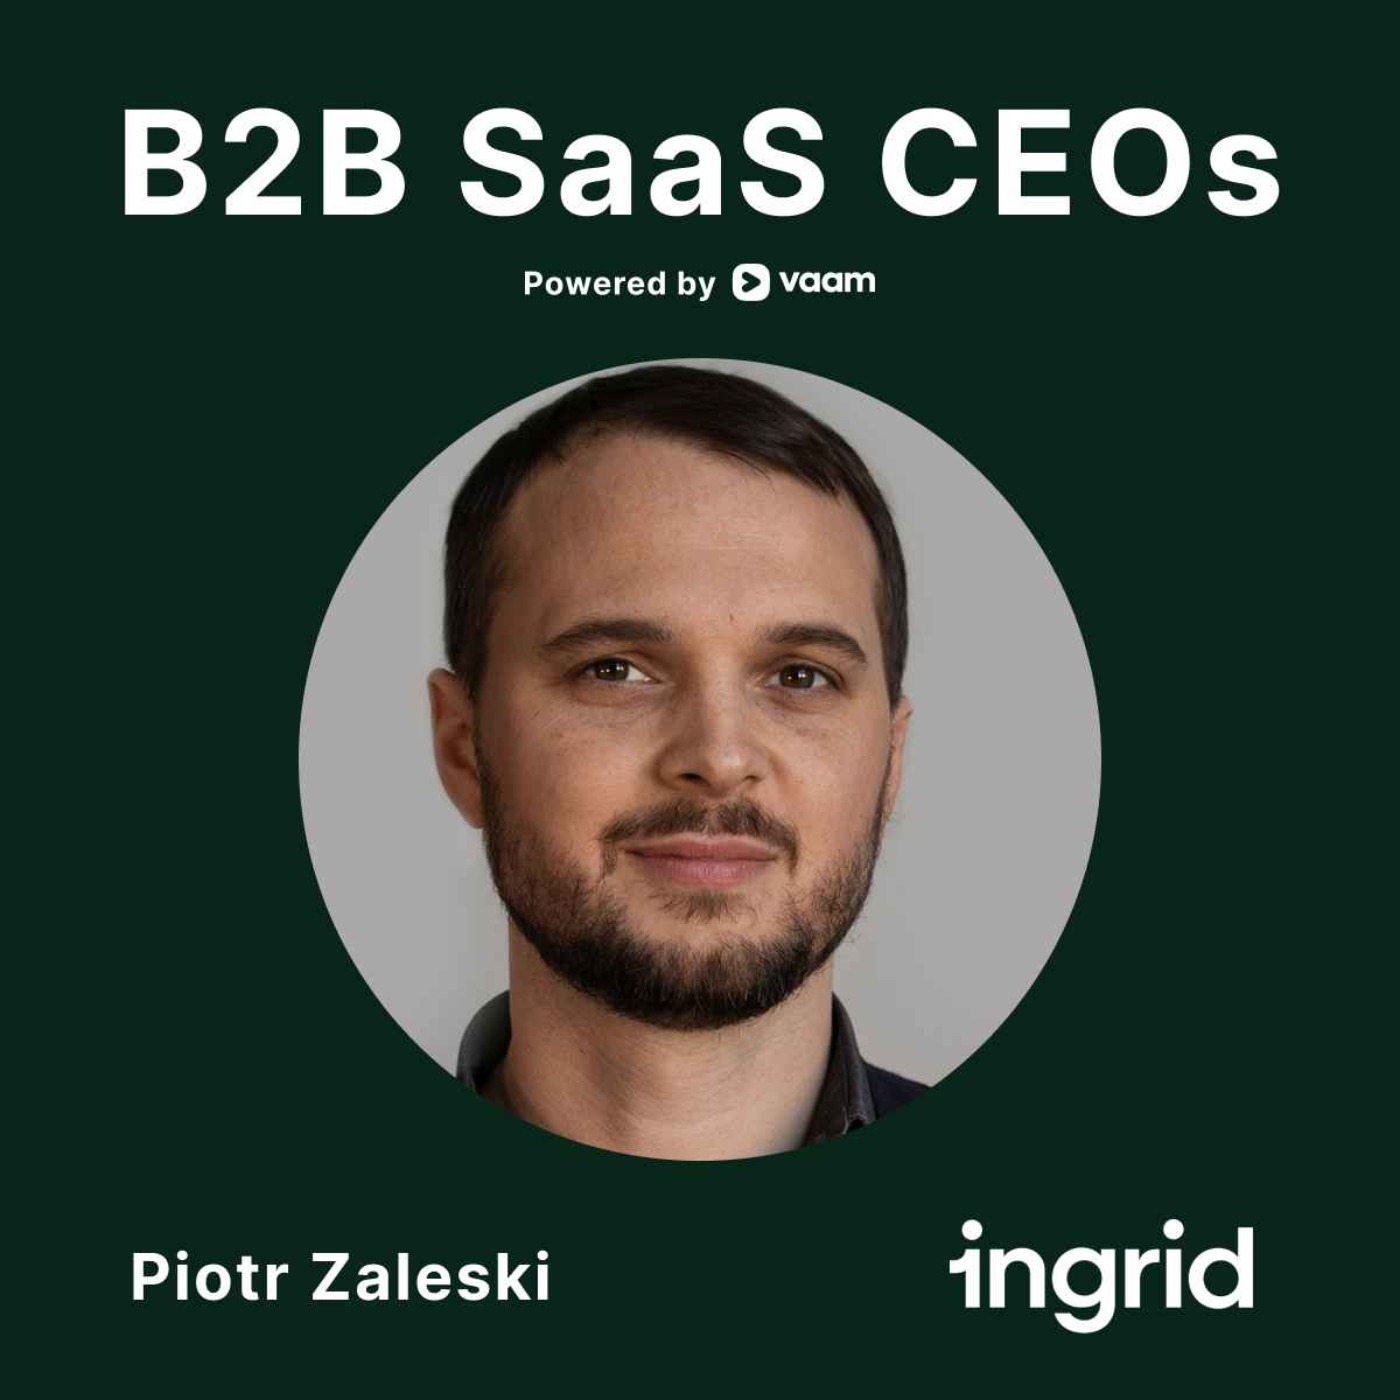 44. Piotr Zaleski (Ingrid) - You have to know how to use AI